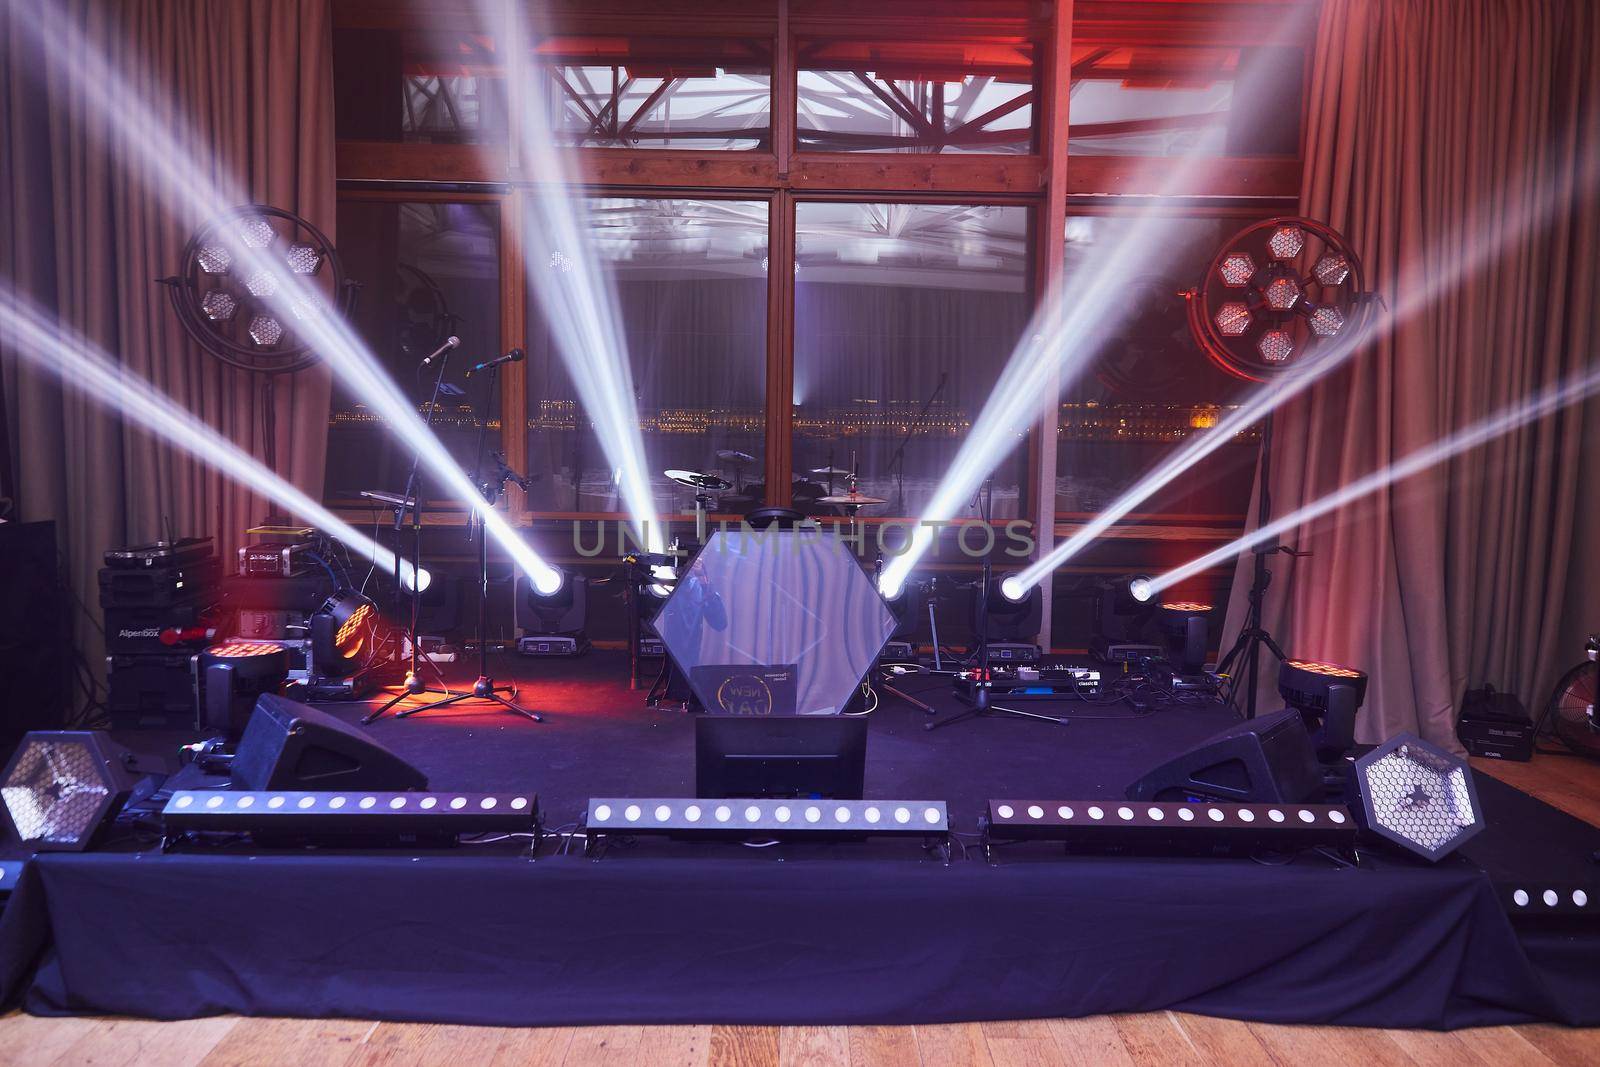 Stunning and powerful nightclub stage illumination before concert. High quality photo